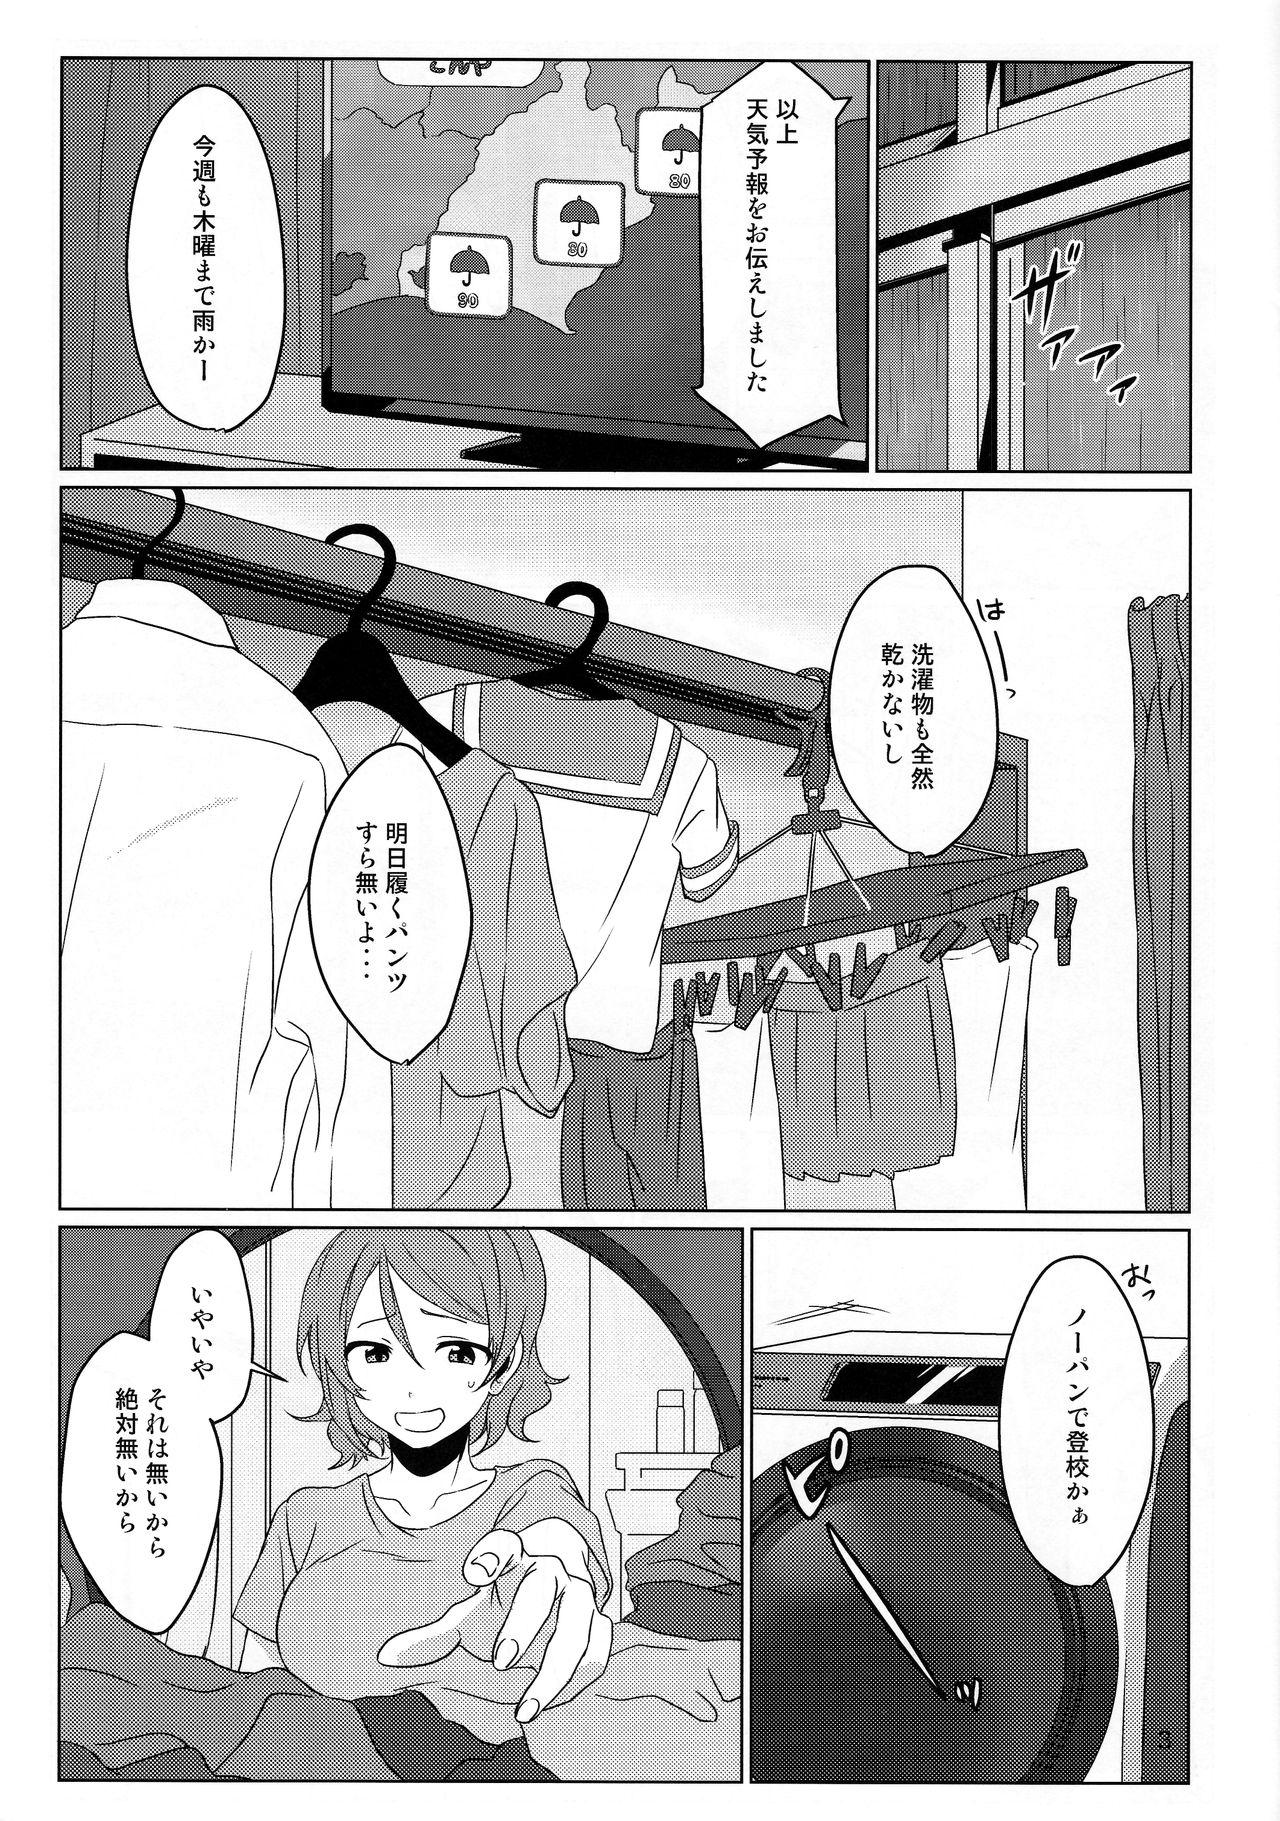 Tight Coin laundry - Love live sunshine Jap - Page 2